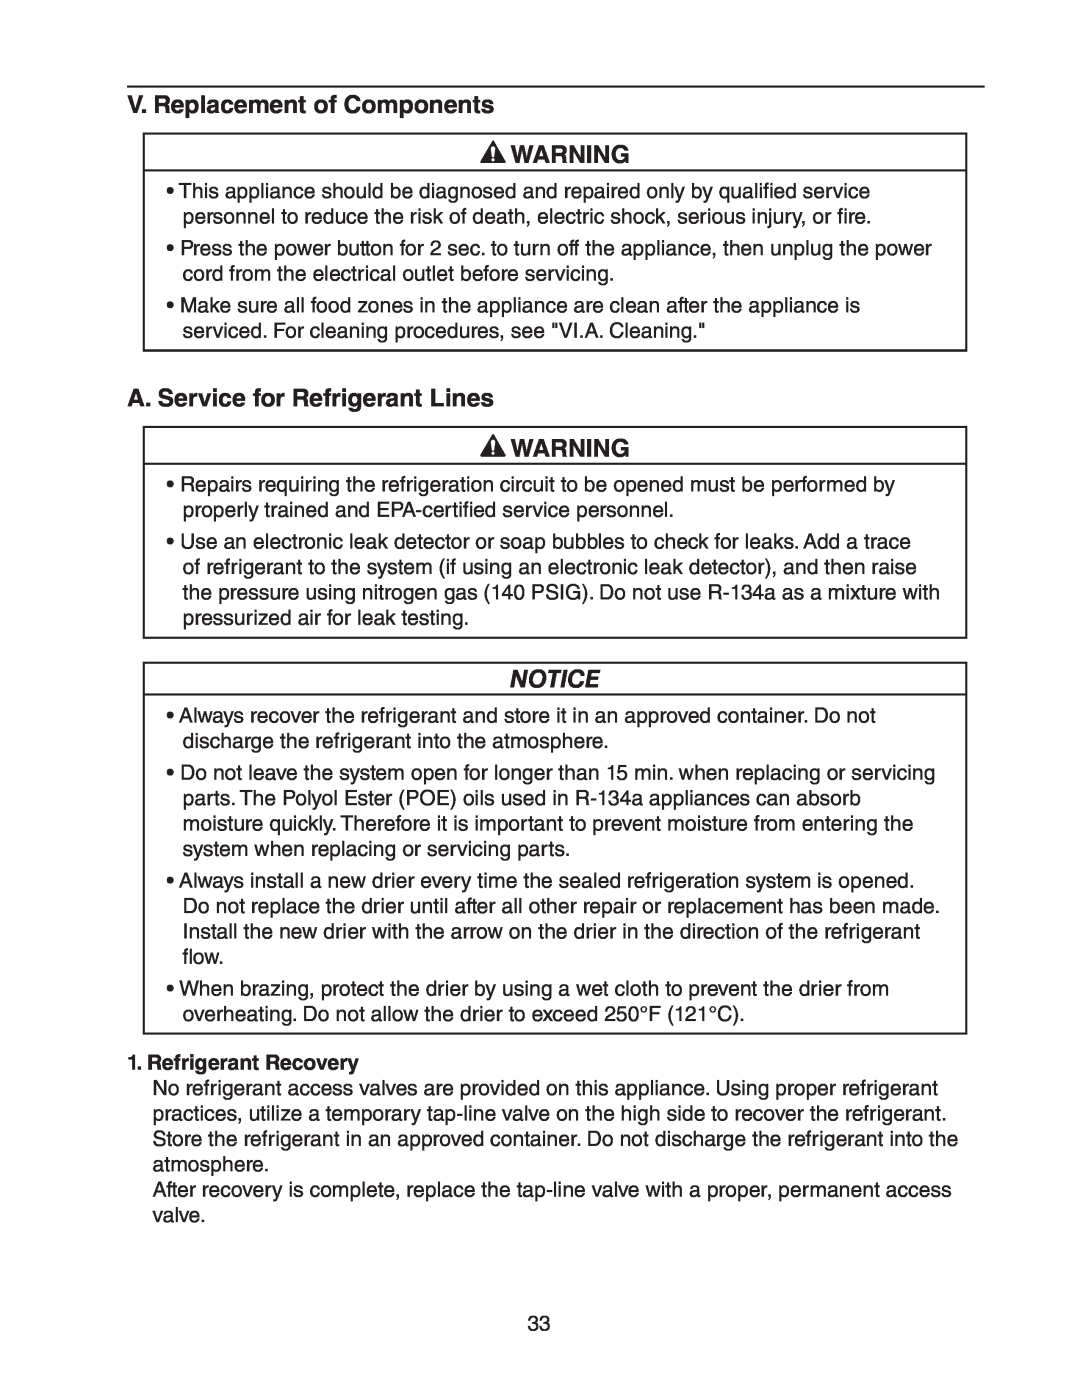 Hoshizaki HR24A service manual V. Replacement of Components, A.Service for Refrigerant Lines, Refrigerant Recovery 